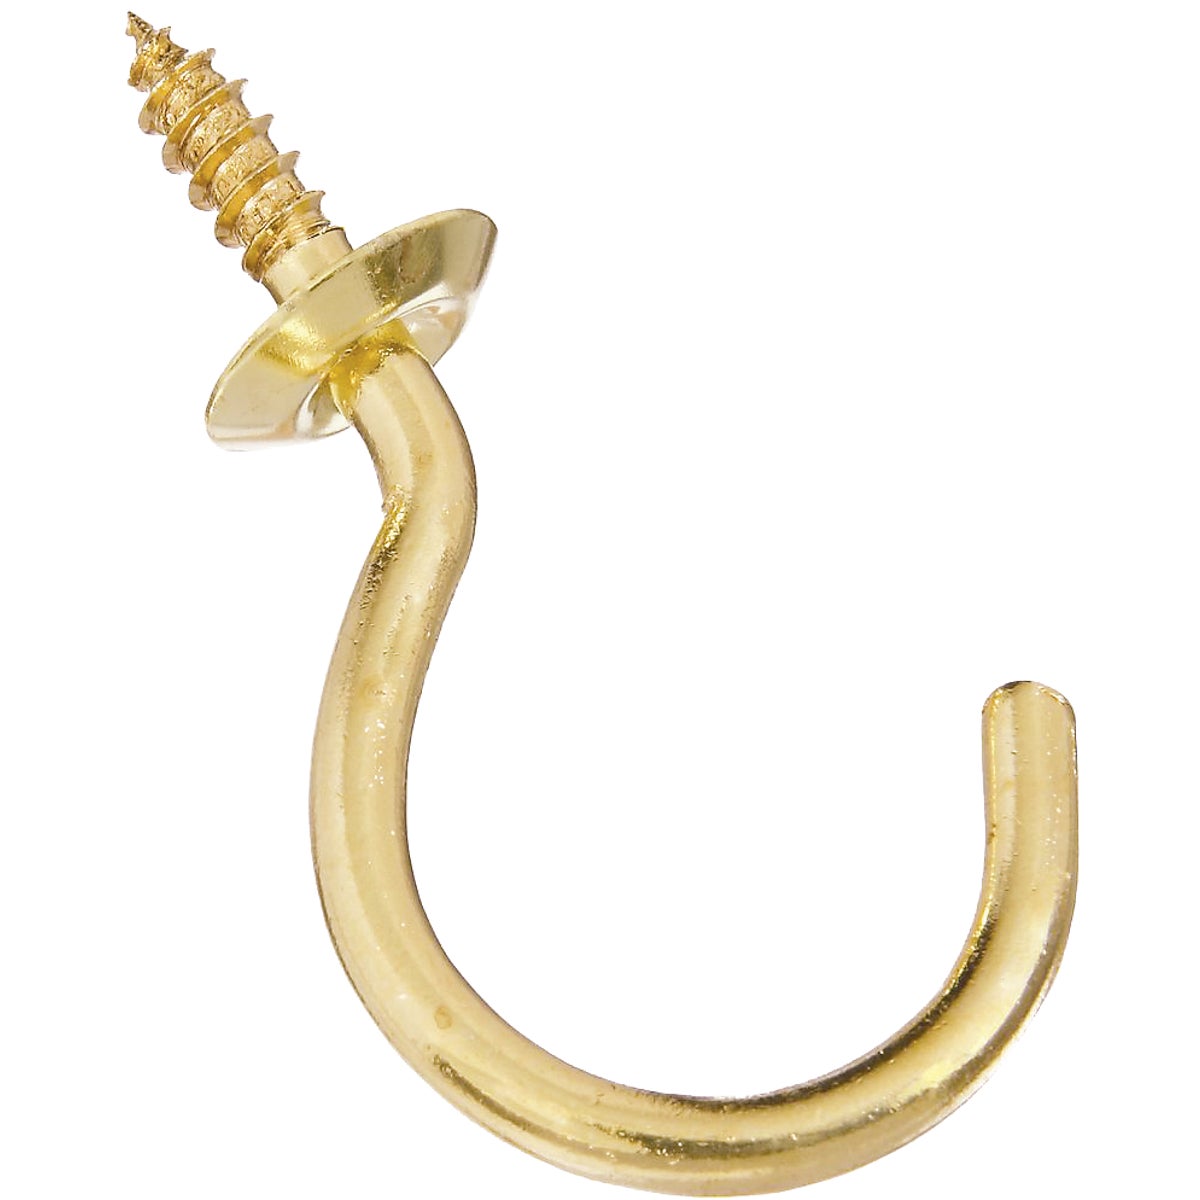 National V2021 1-1/2 In. Solid Brass Series Cup Hook (2 Count)